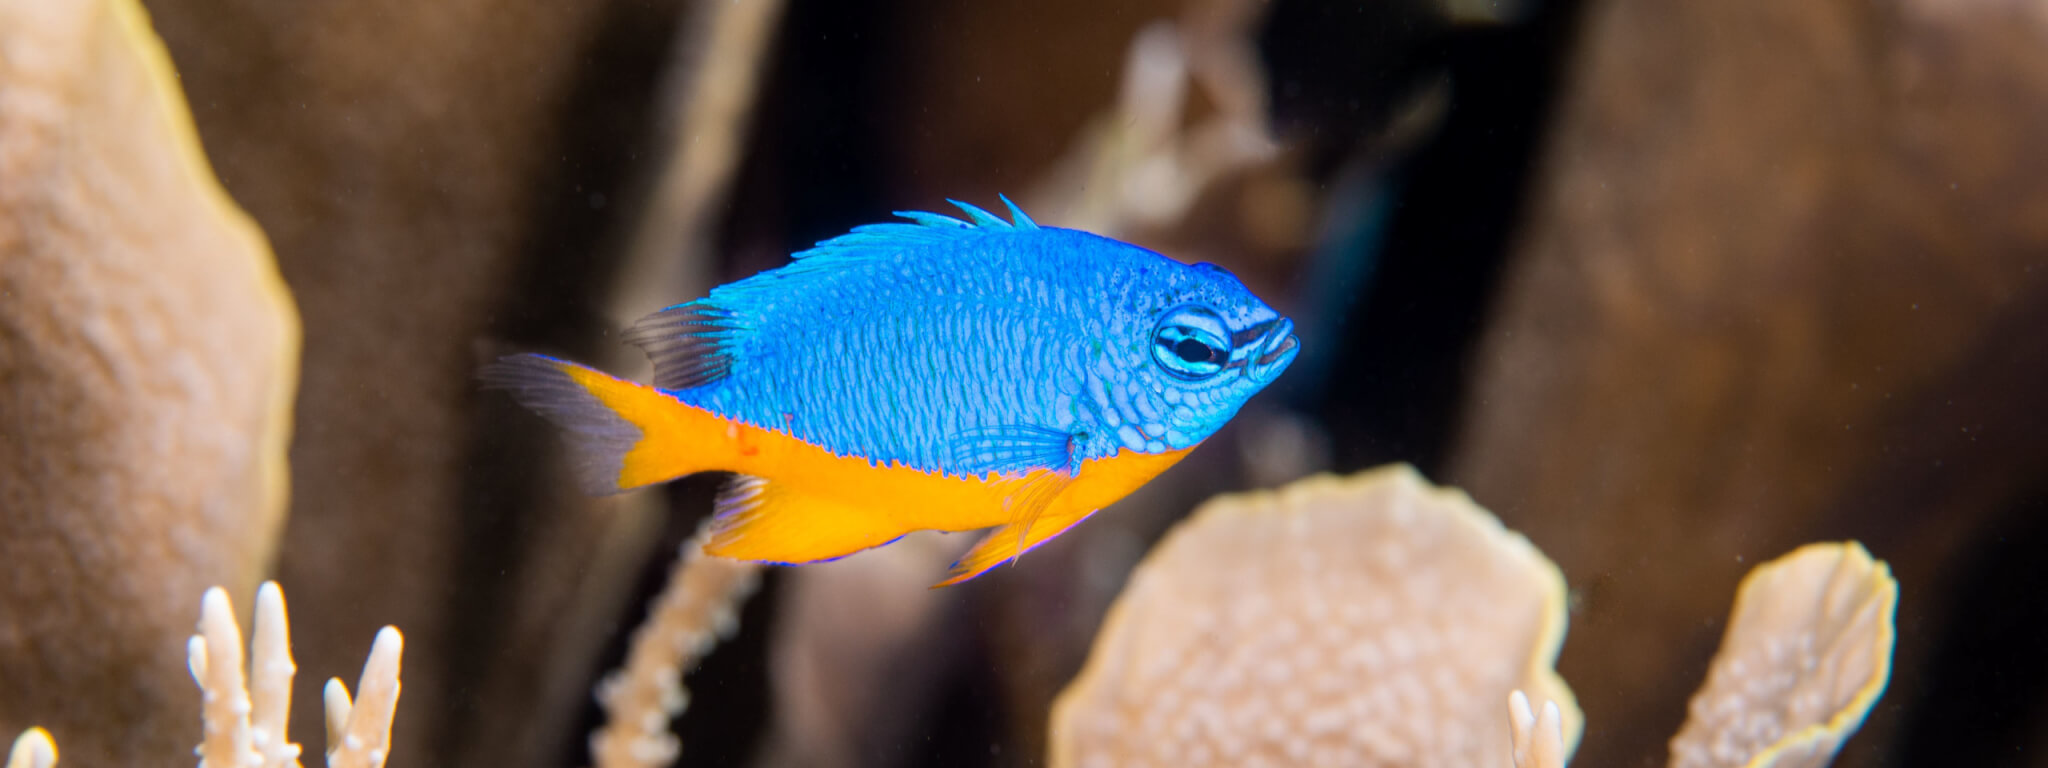 Azure damselfish are examples of tropical fishes found throughout the coral triangle